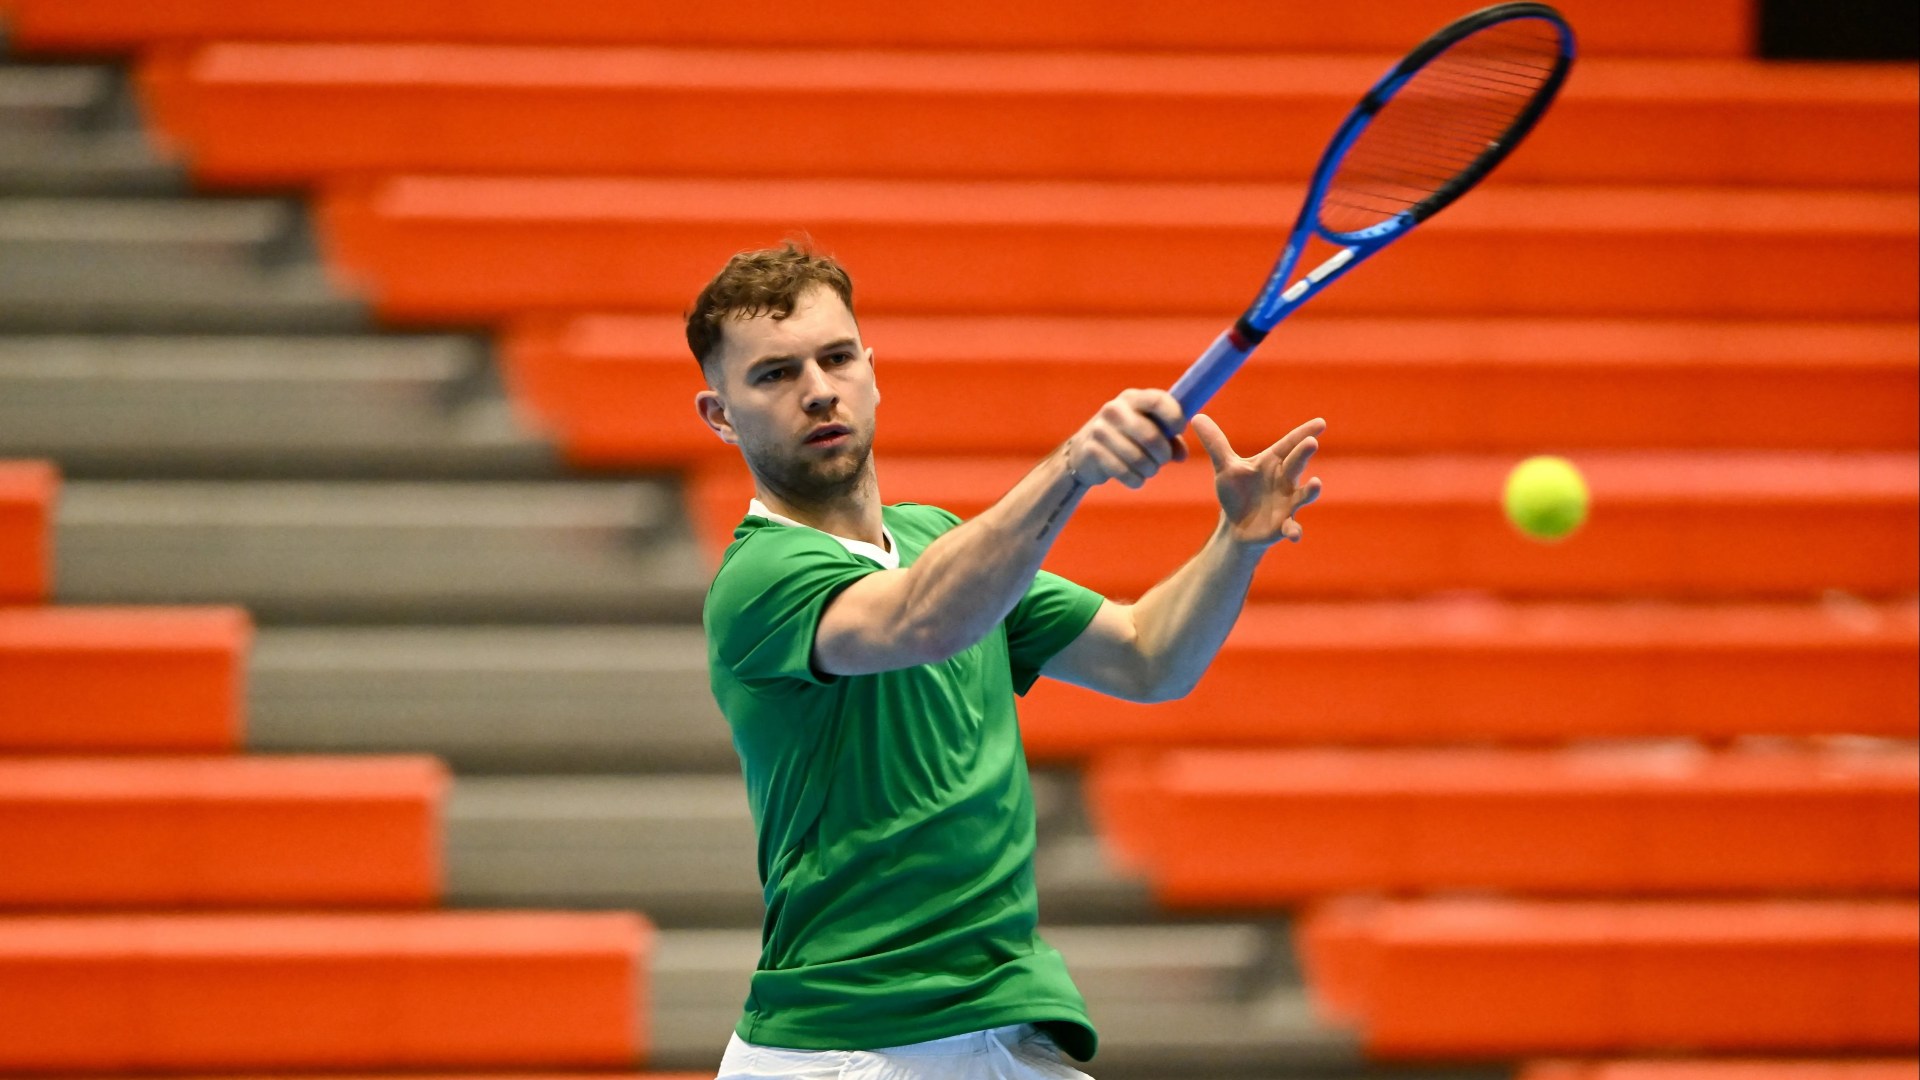 Irish Davis Cup star announces surprise retirement from professional tennis at the age of 24 [Video]